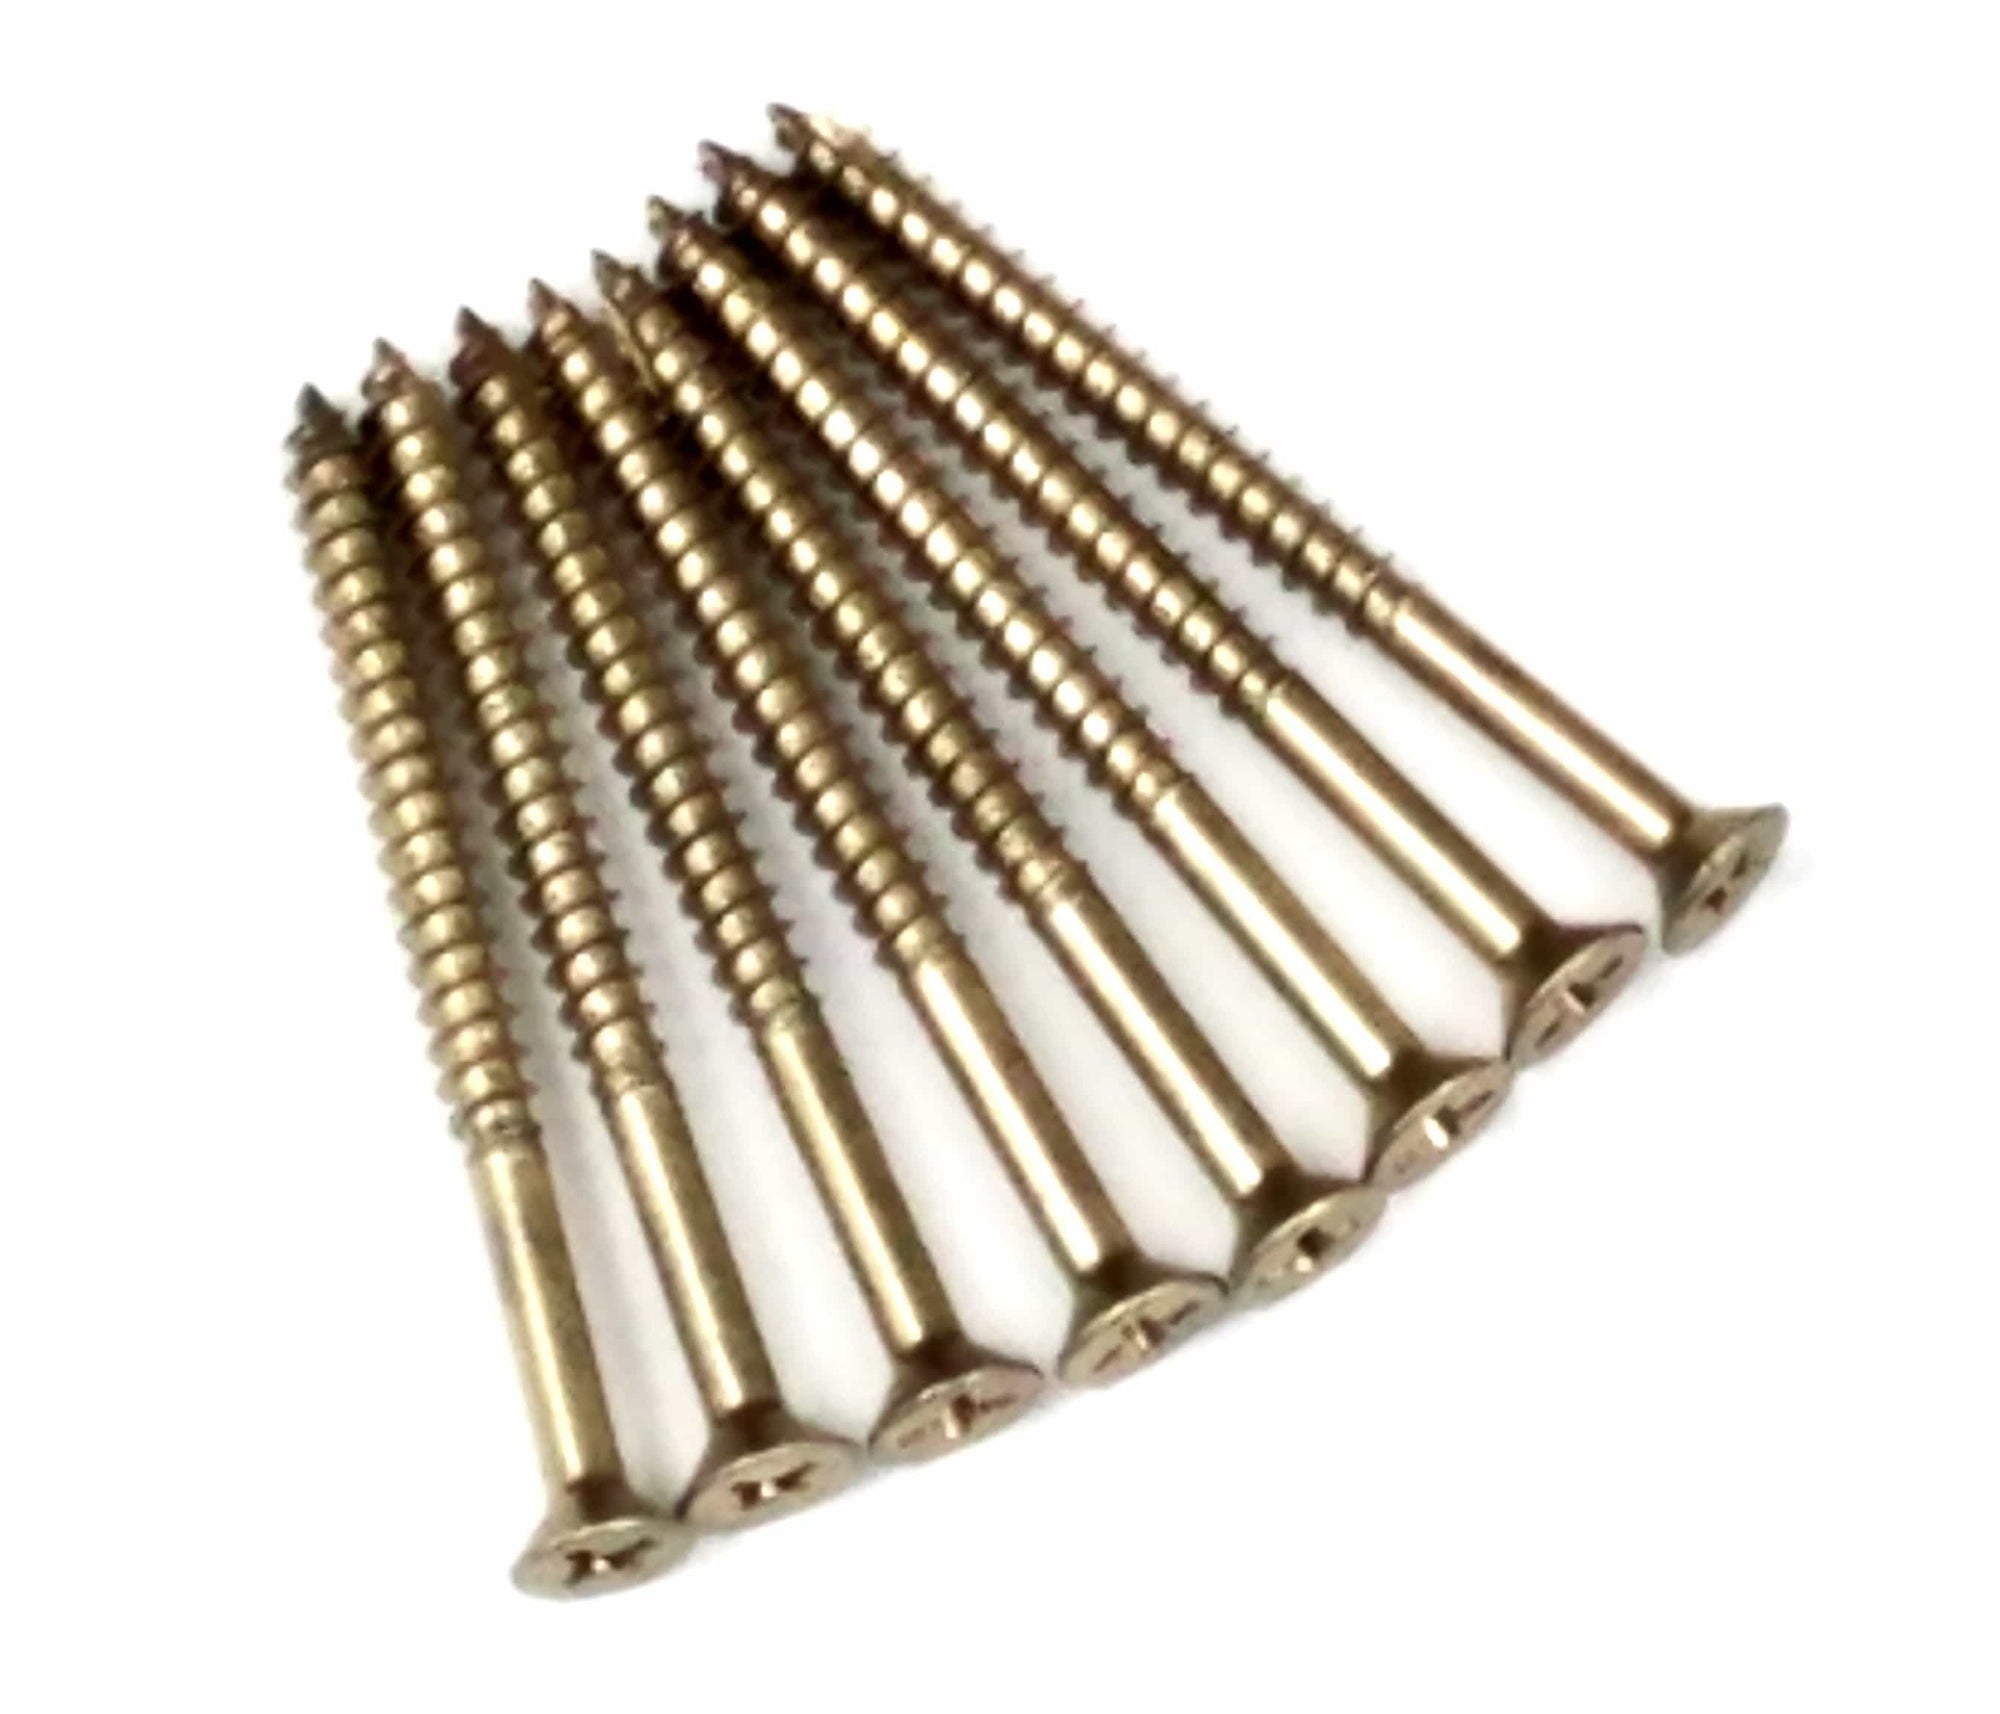 Flat Head #9 x 2 1/4" or 3" wood screws with 1 1/2" thread - Bright Brass Finish 24 Pack or 96 Pack